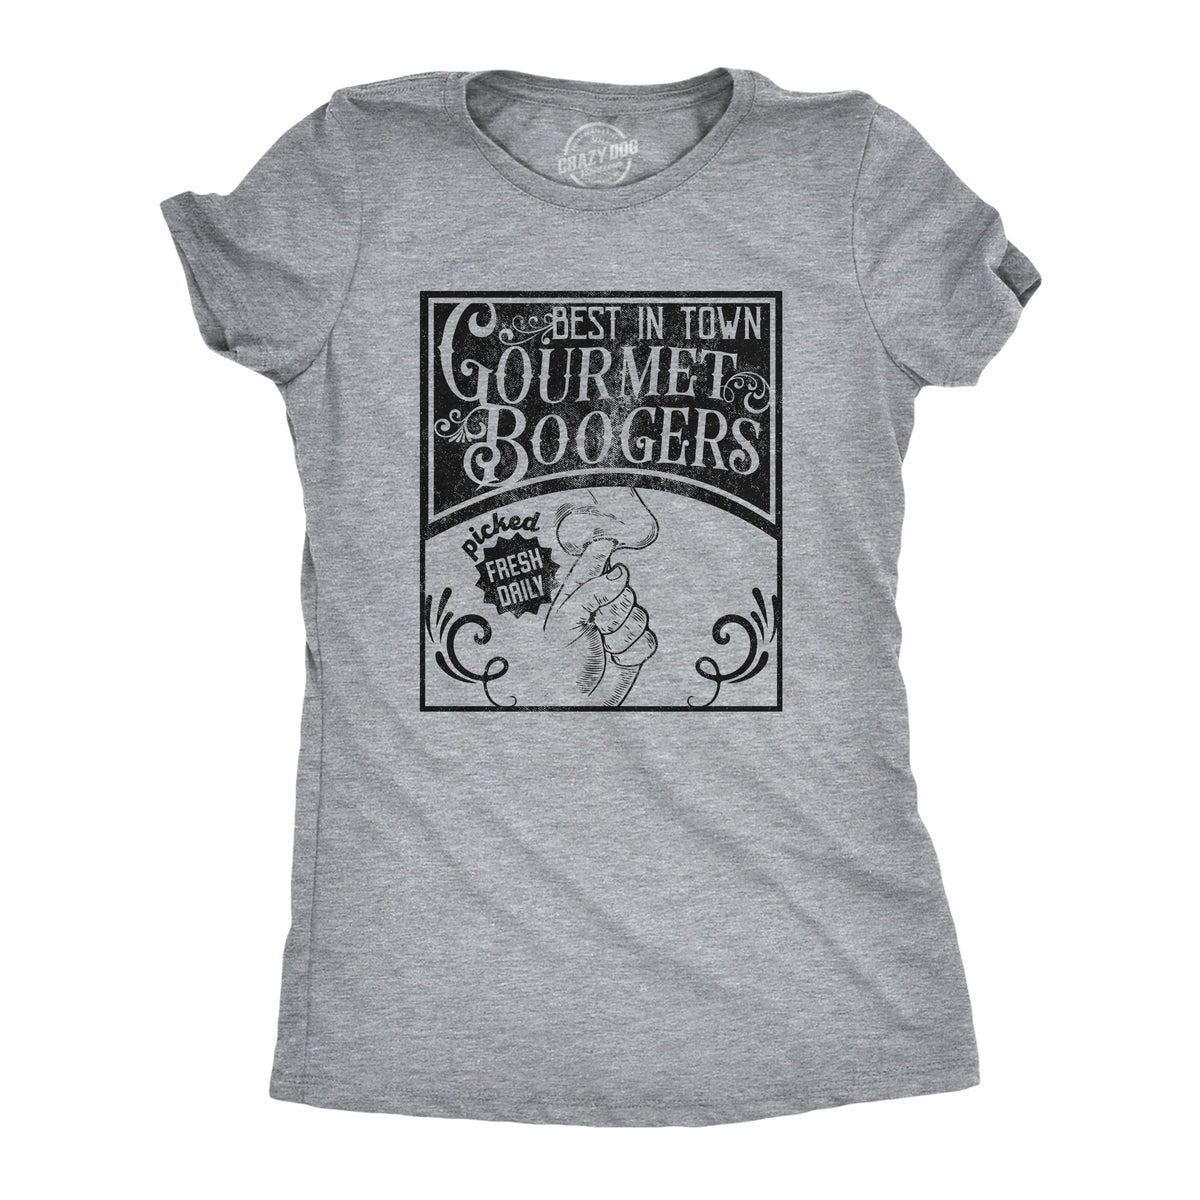 Funny Light Heather Grey - BOOGERS Gourmet Boogers Womens T Shirt Nerdy sarcastic Tee